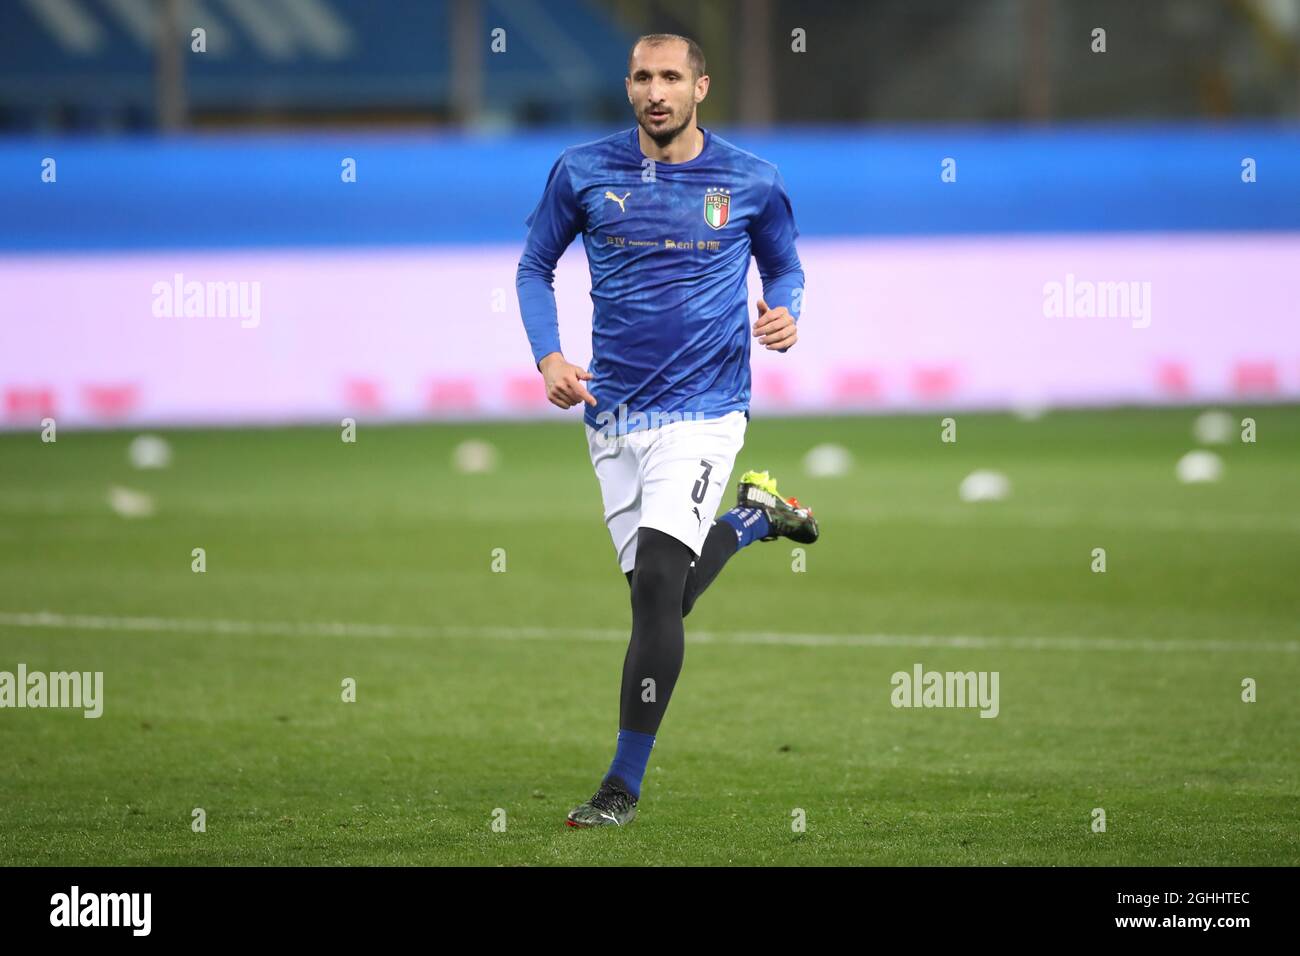 Giorgio Chiellini of Italy during the warm up prior to the Fifa World Cup qualifiers match at Stadio Ennio Tardini, Parma. Picture date: 25th March 2021. Picture credit should read: Jonathan Moscrop/Sportimage via PA Images Stock Photo